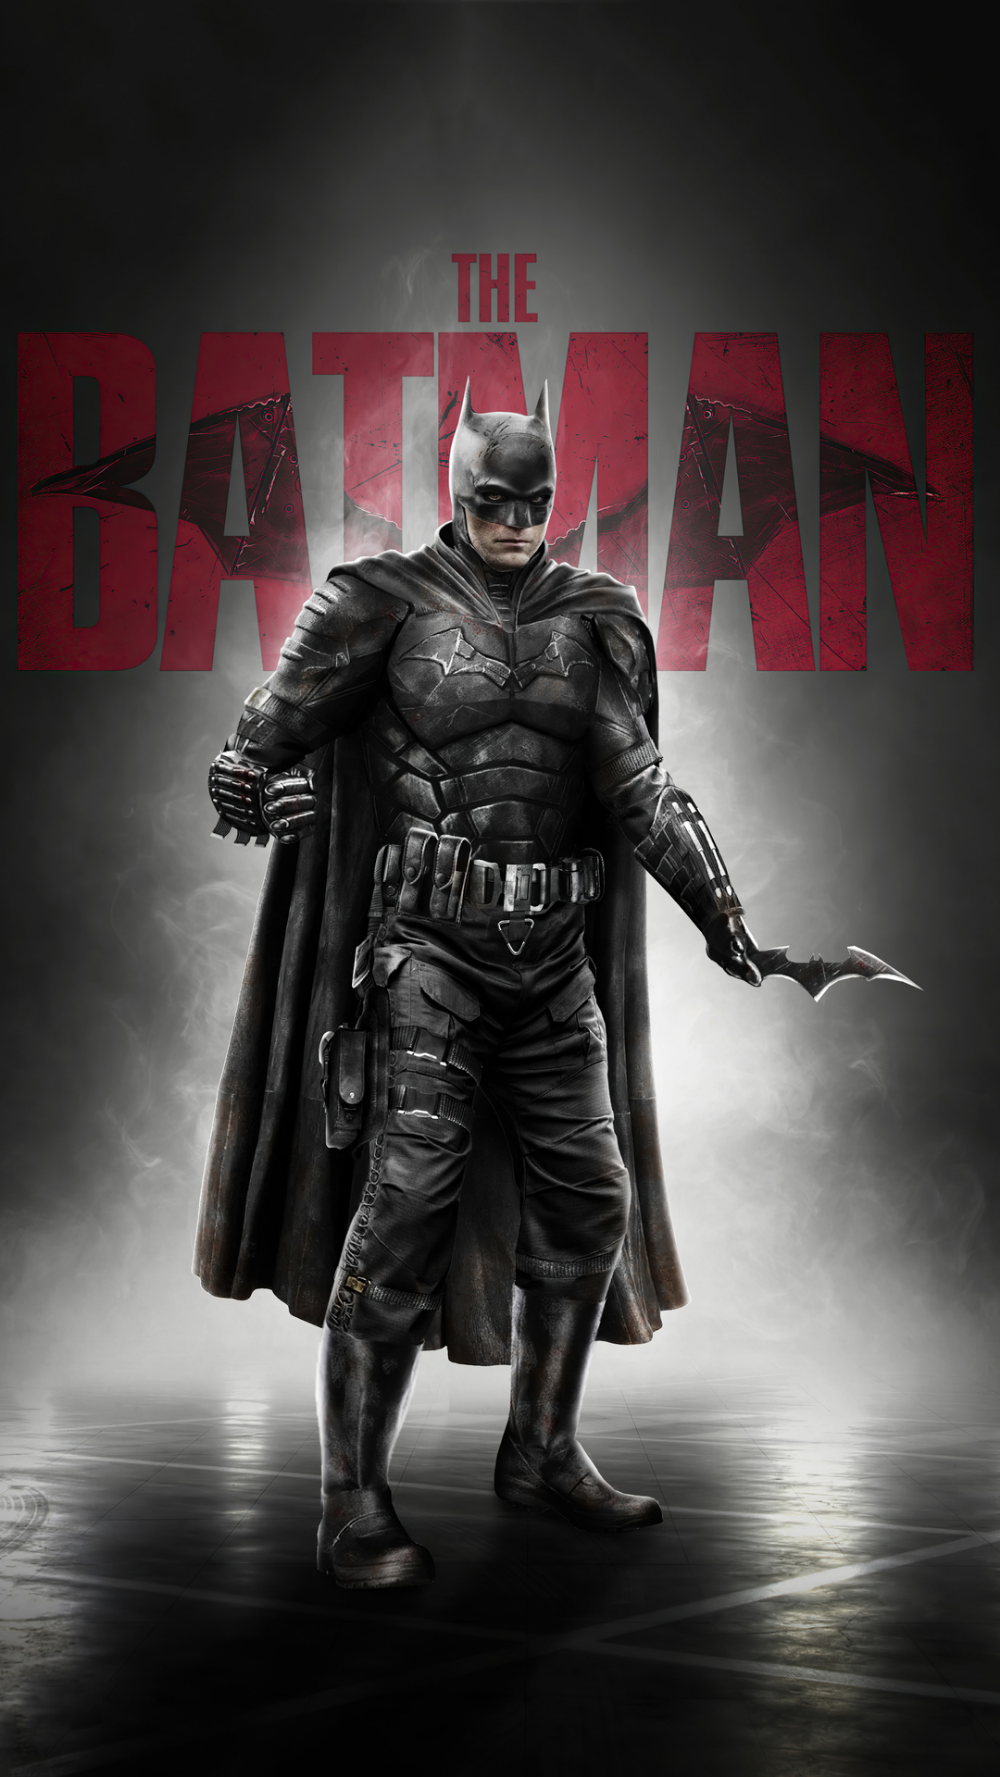 The BatmanK wallpaper, free and easy to download. Batman wallpaper, Batman joker wallpaper, Batman poster